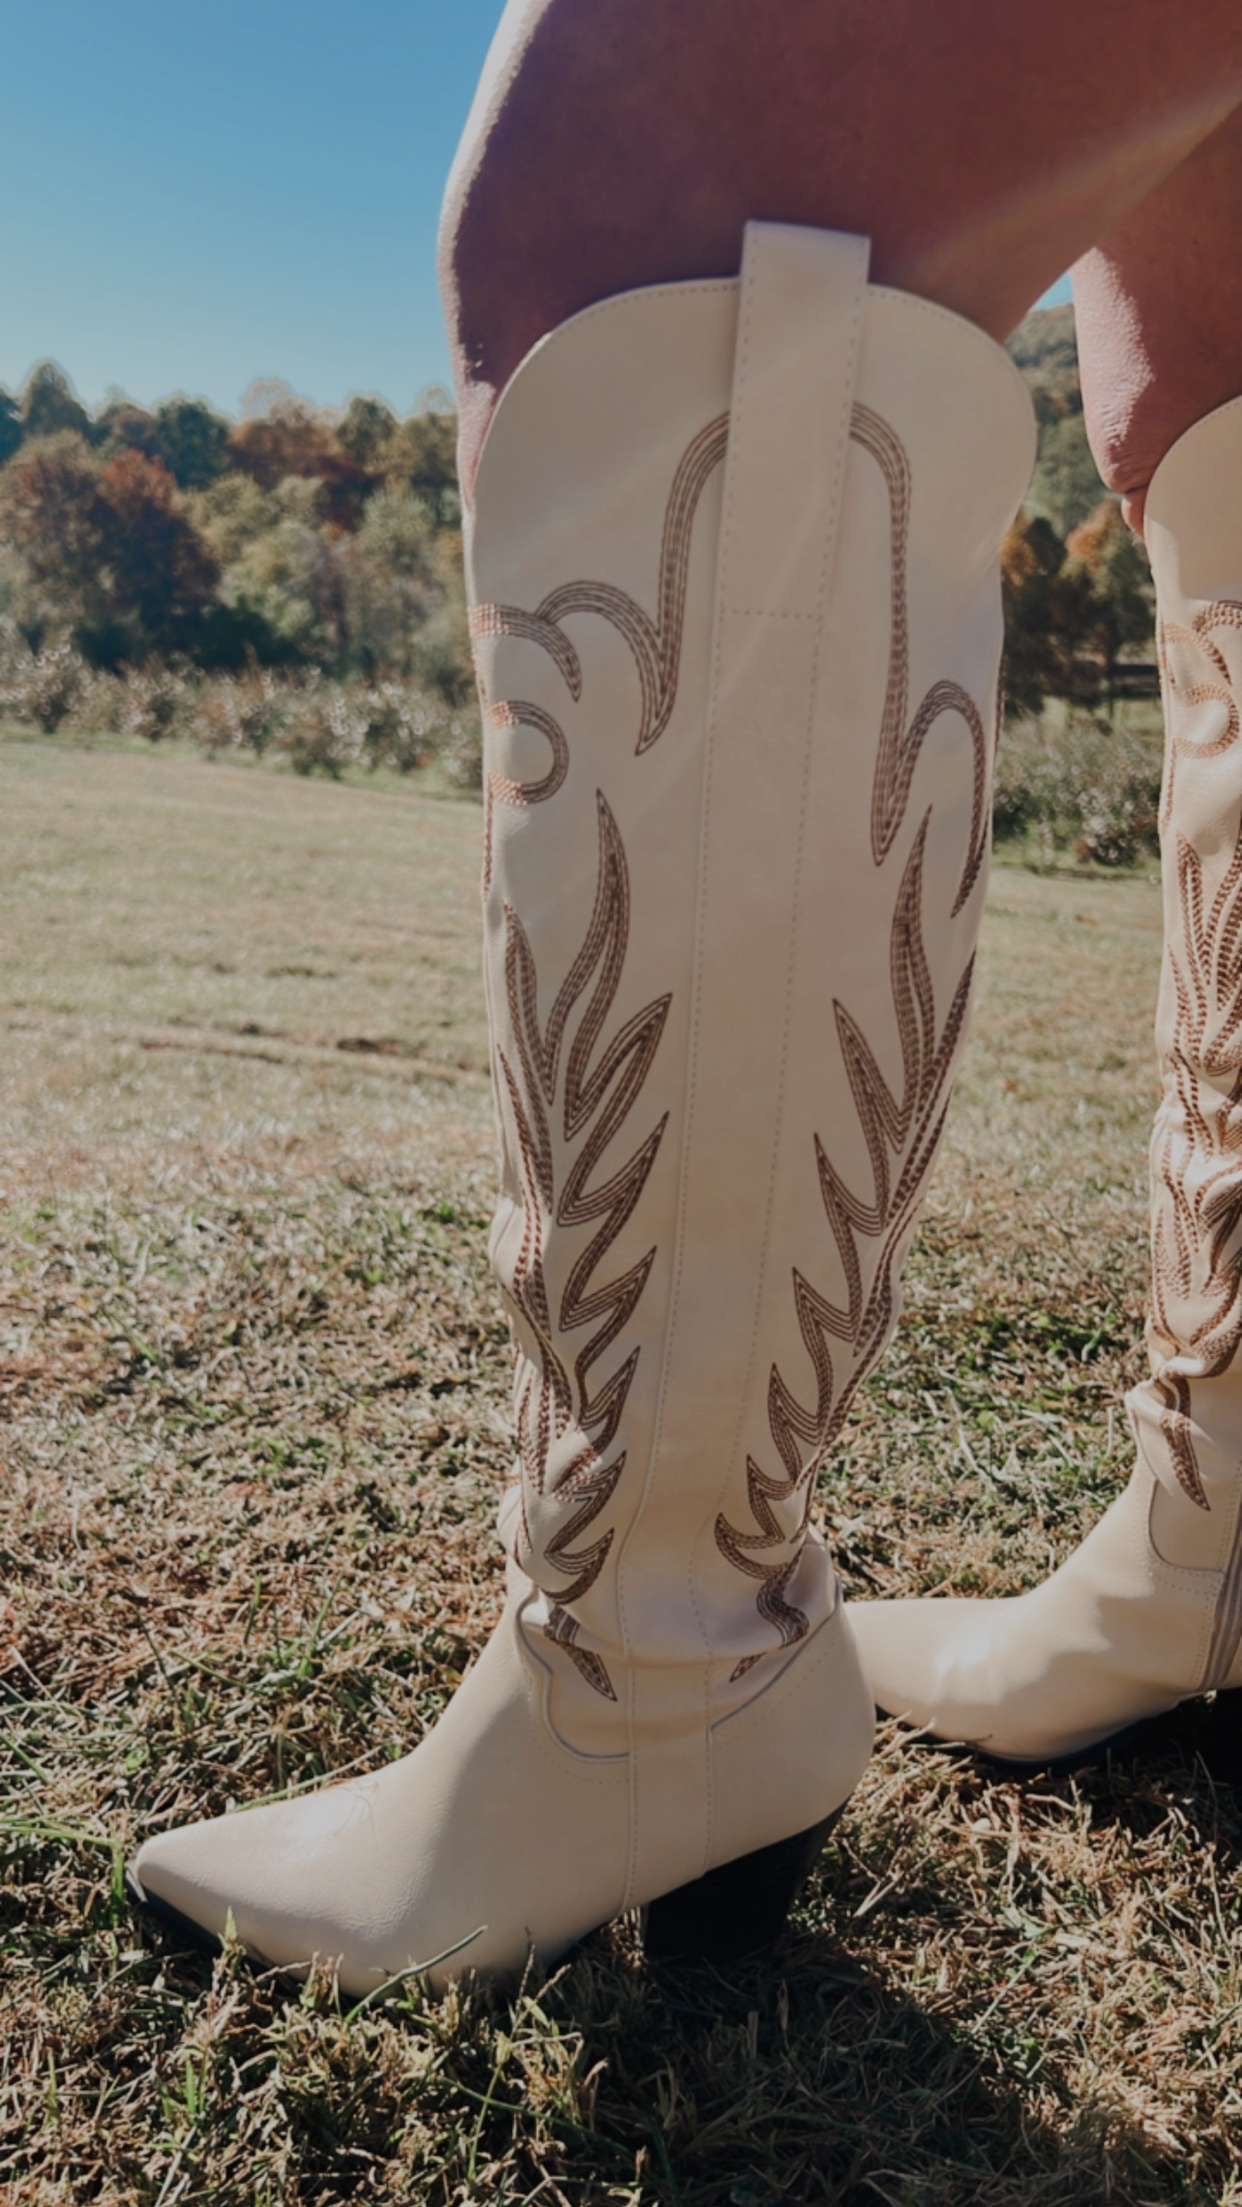 Gone Country Knee High Cowgirl Boots